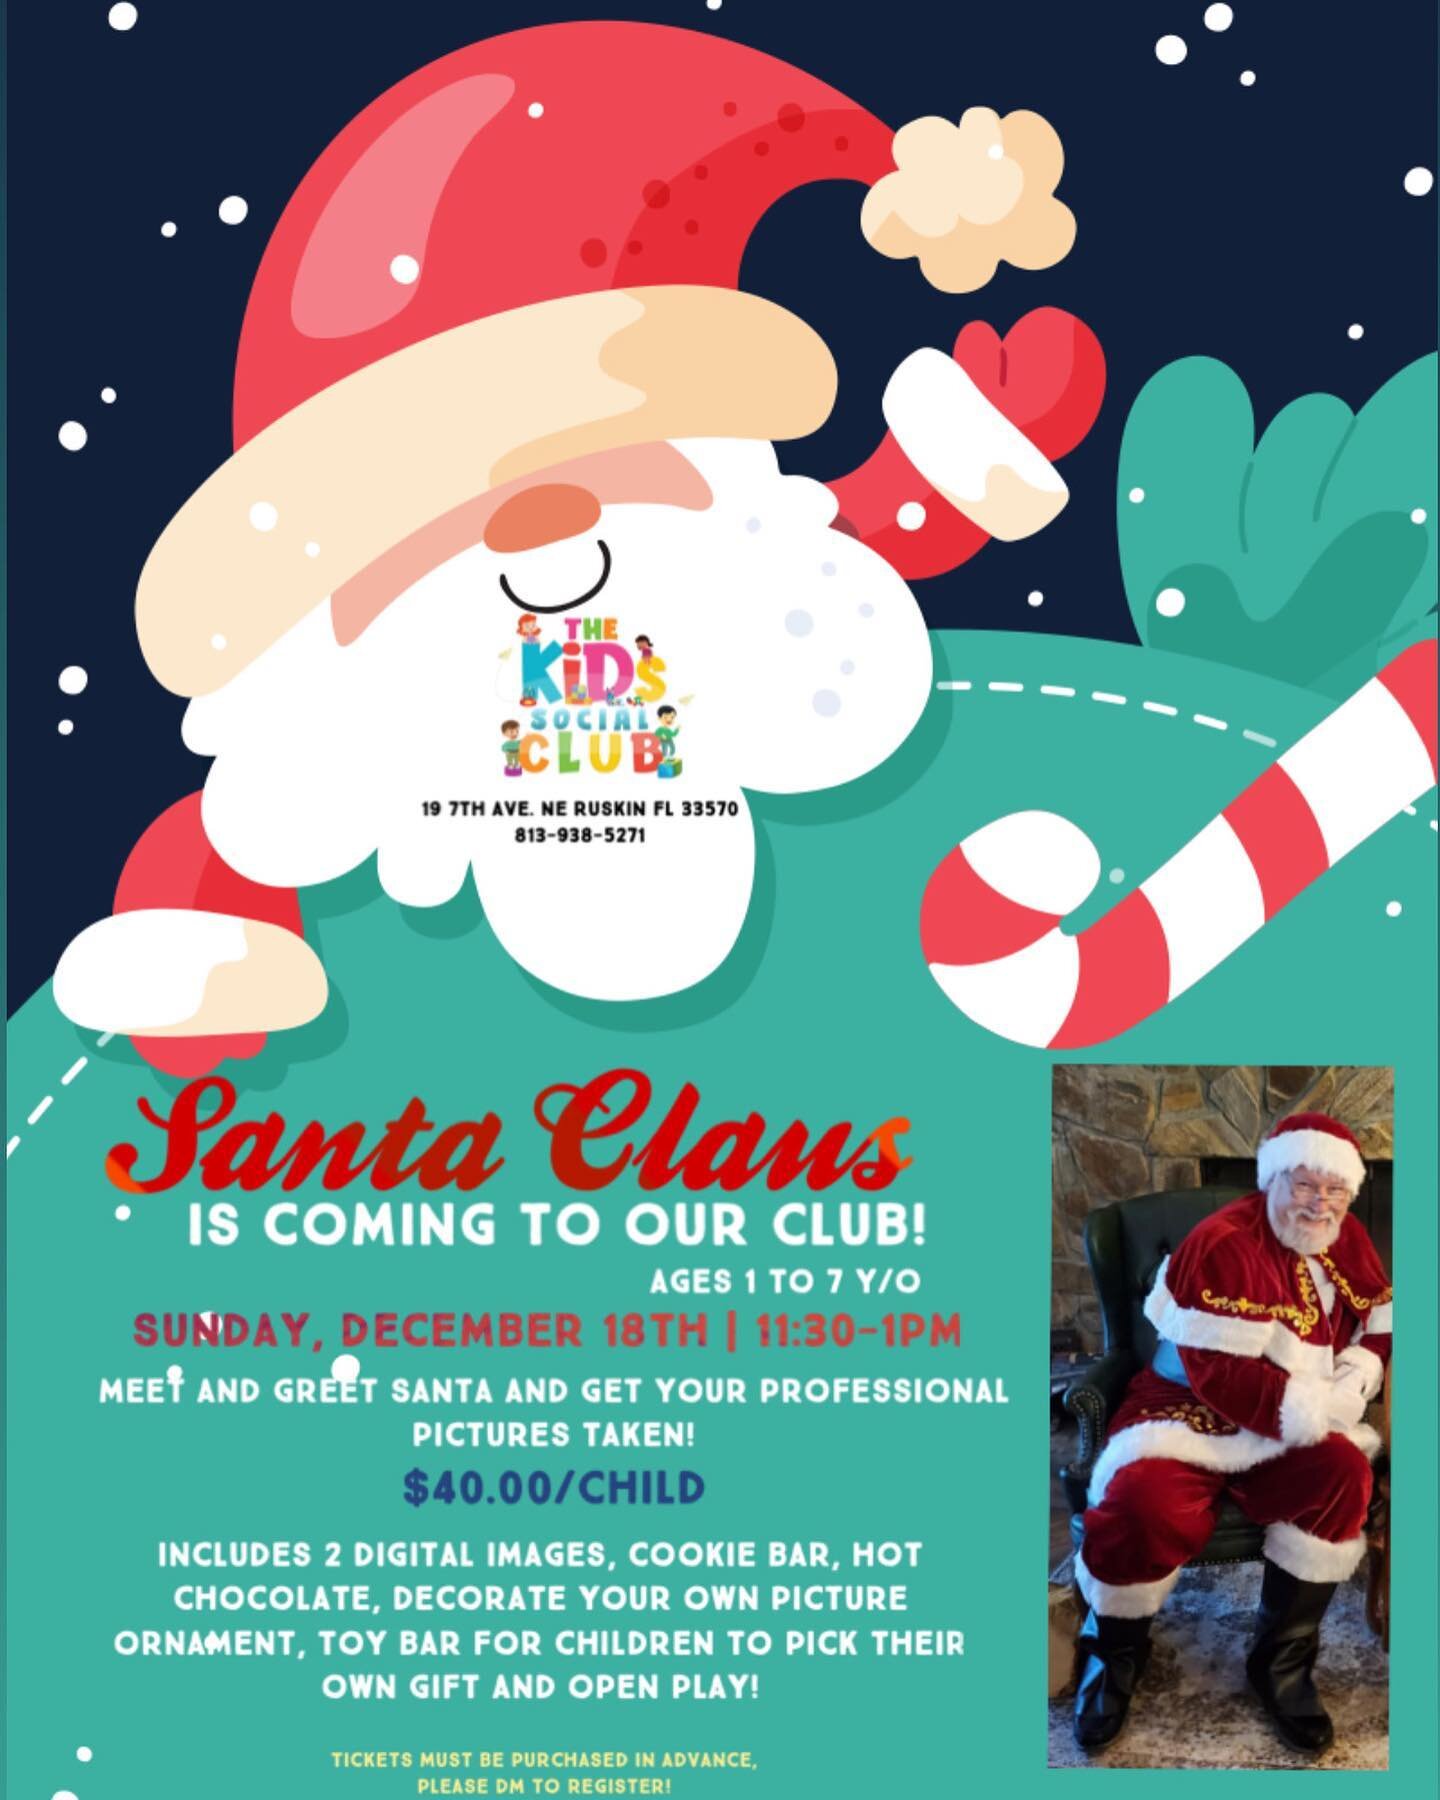 Brunch with Santa Claus 🎅🏻 12/18 11:30-1pm

Meet and greet Santa and get your professional pictures taken!

$40.00/Child 

Includes 2 digital images, cookie bar, hot chocolate, decorate your own picture ornament, toy bar for children to pick their 